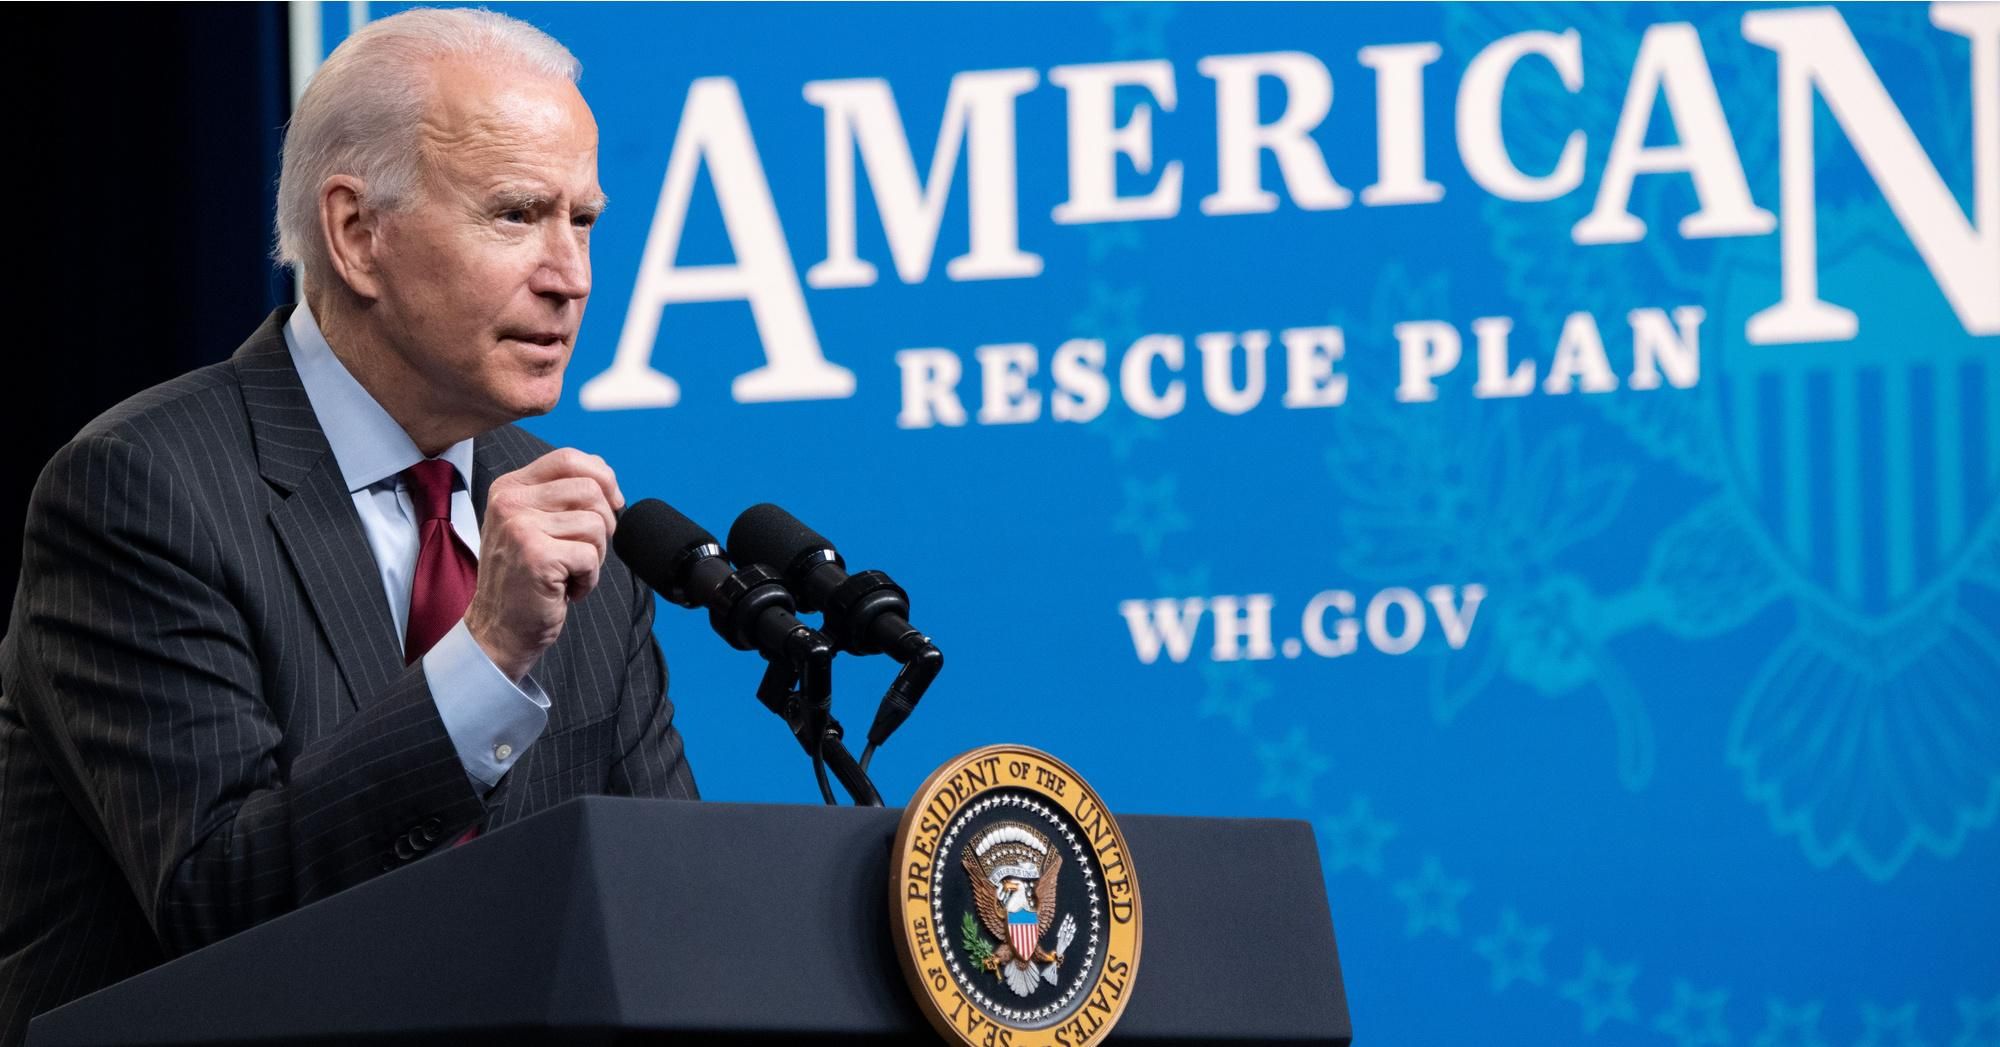 President Joe Biden touts the American Rescue Plan and Paycheck Protection Program during a February 22, 2021 address at the Eisenhower Executive Office Building in Washington, D.C. (Photo: Saul Loeb/AFP via Getty Images) 